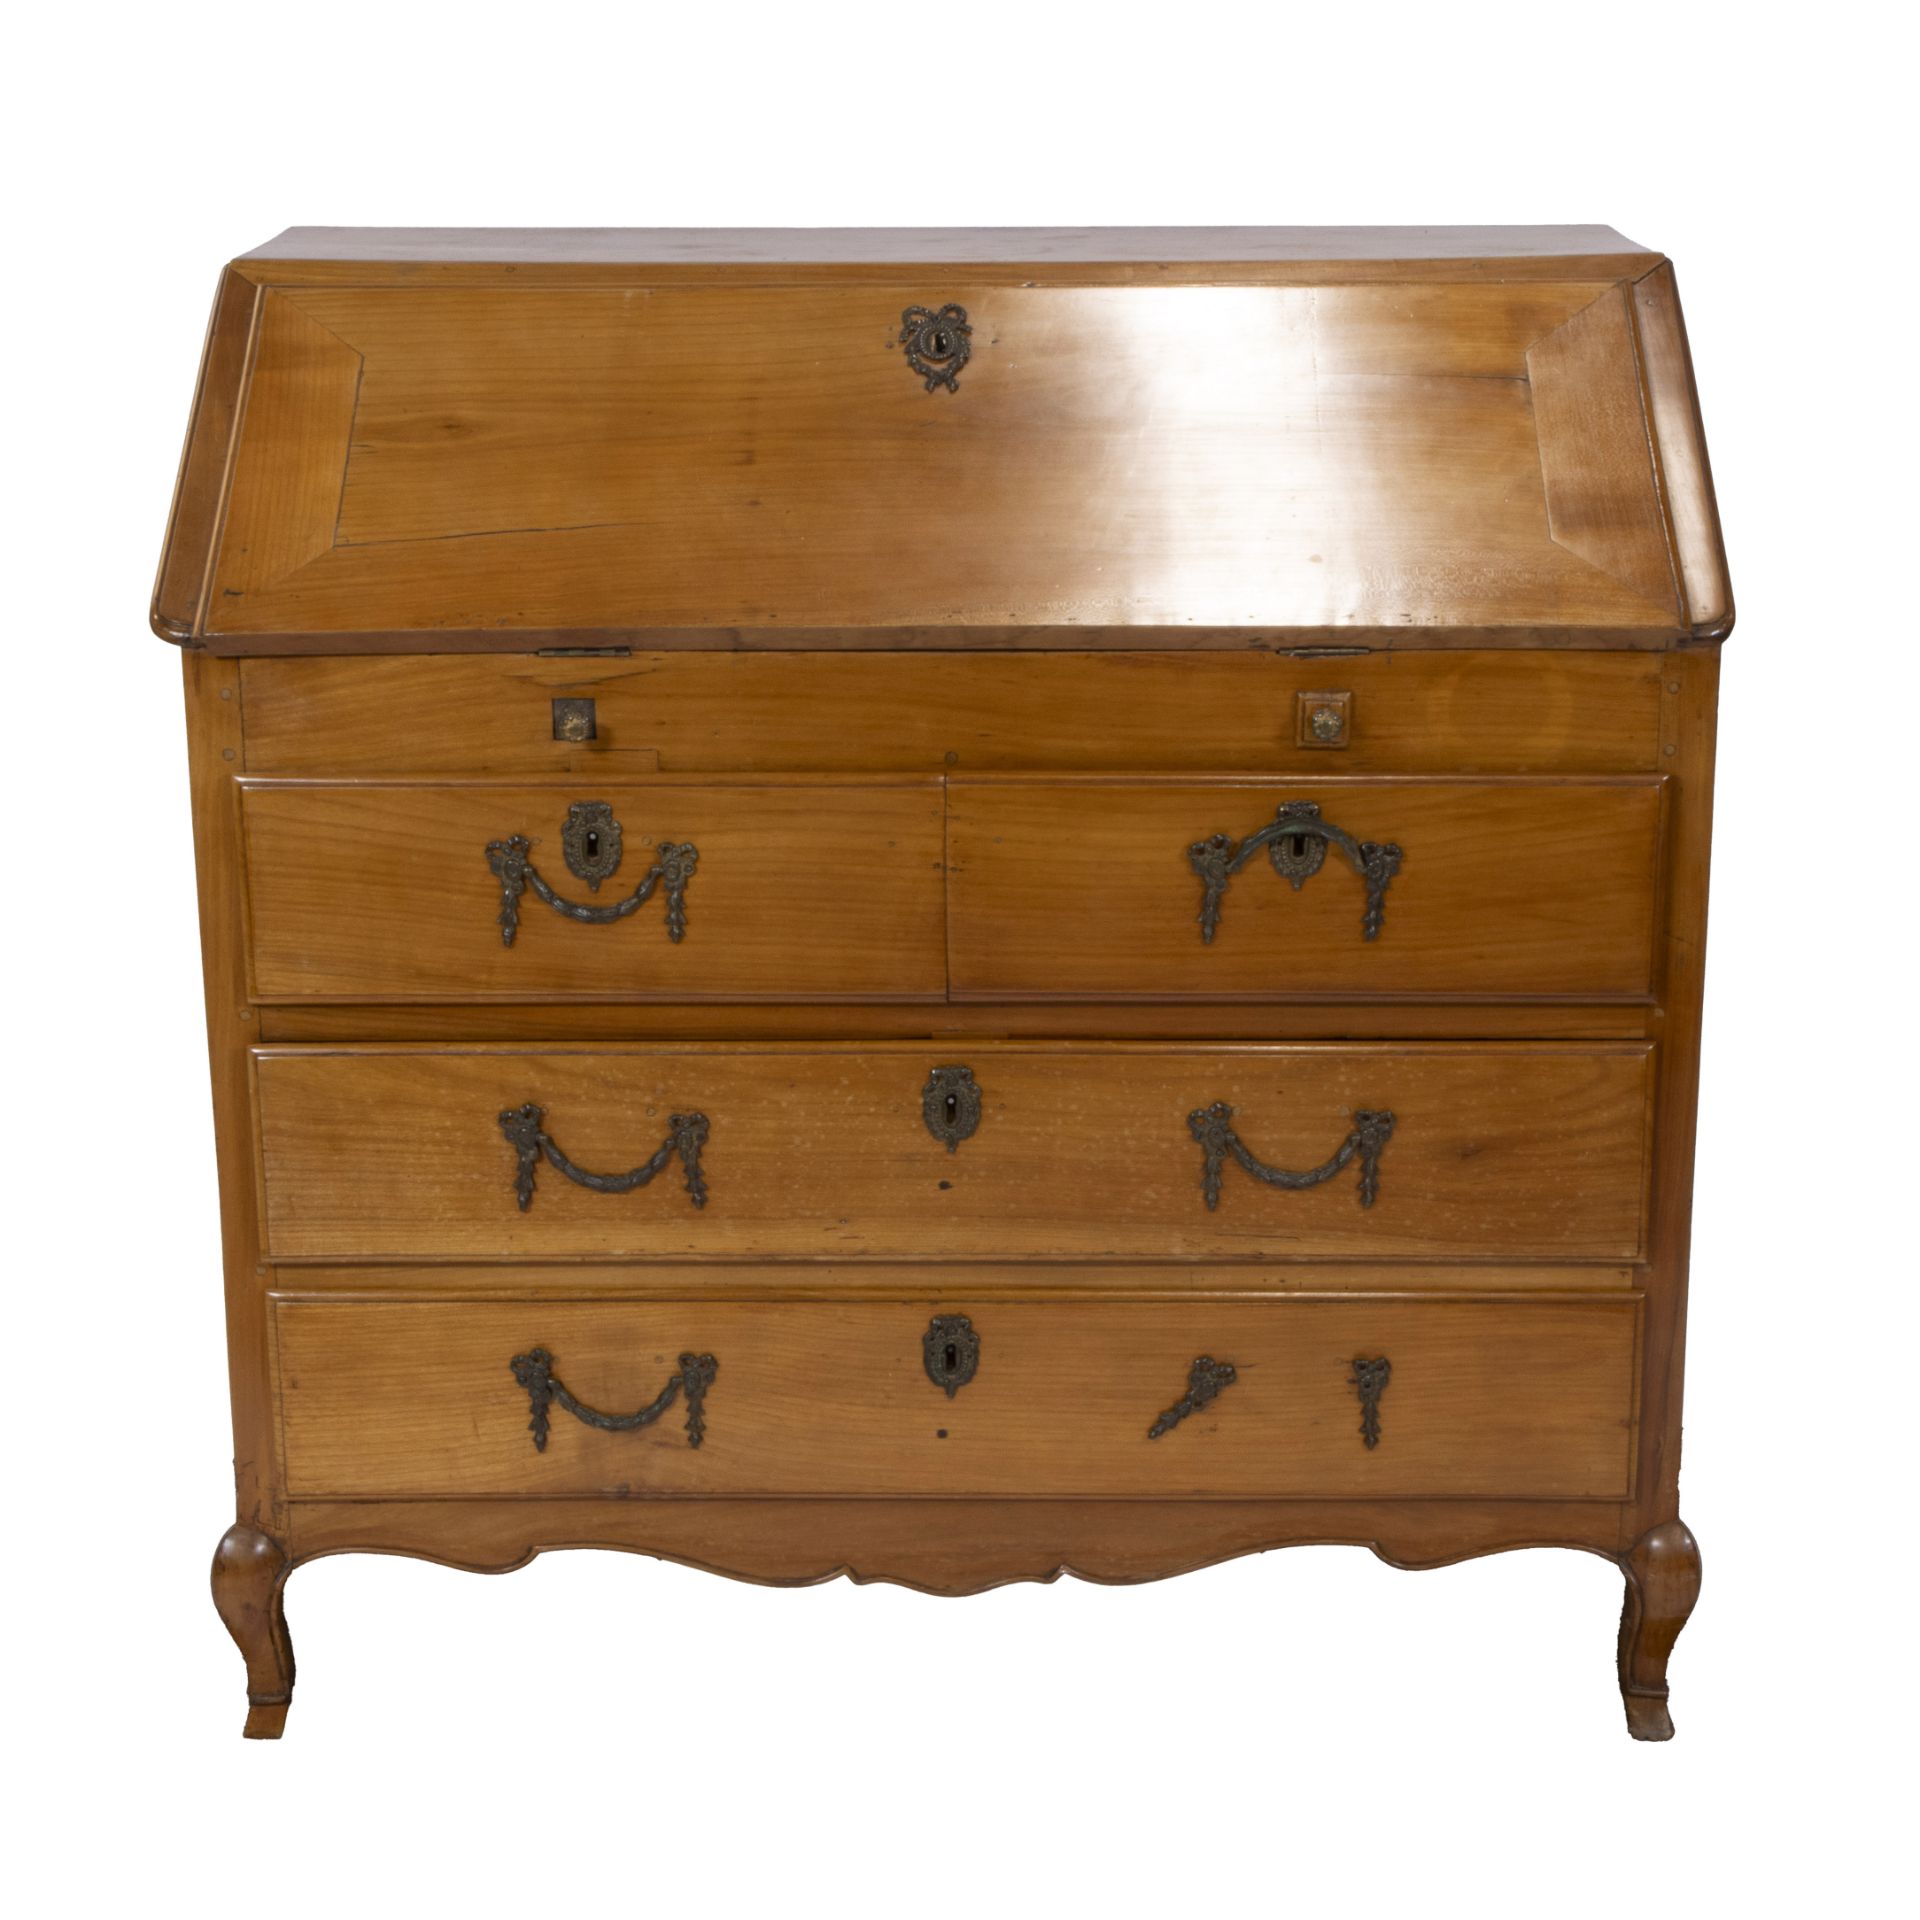 A French flap secretaire with 3 drawers decorated with 'garland' handles, interior comprising 7 smal